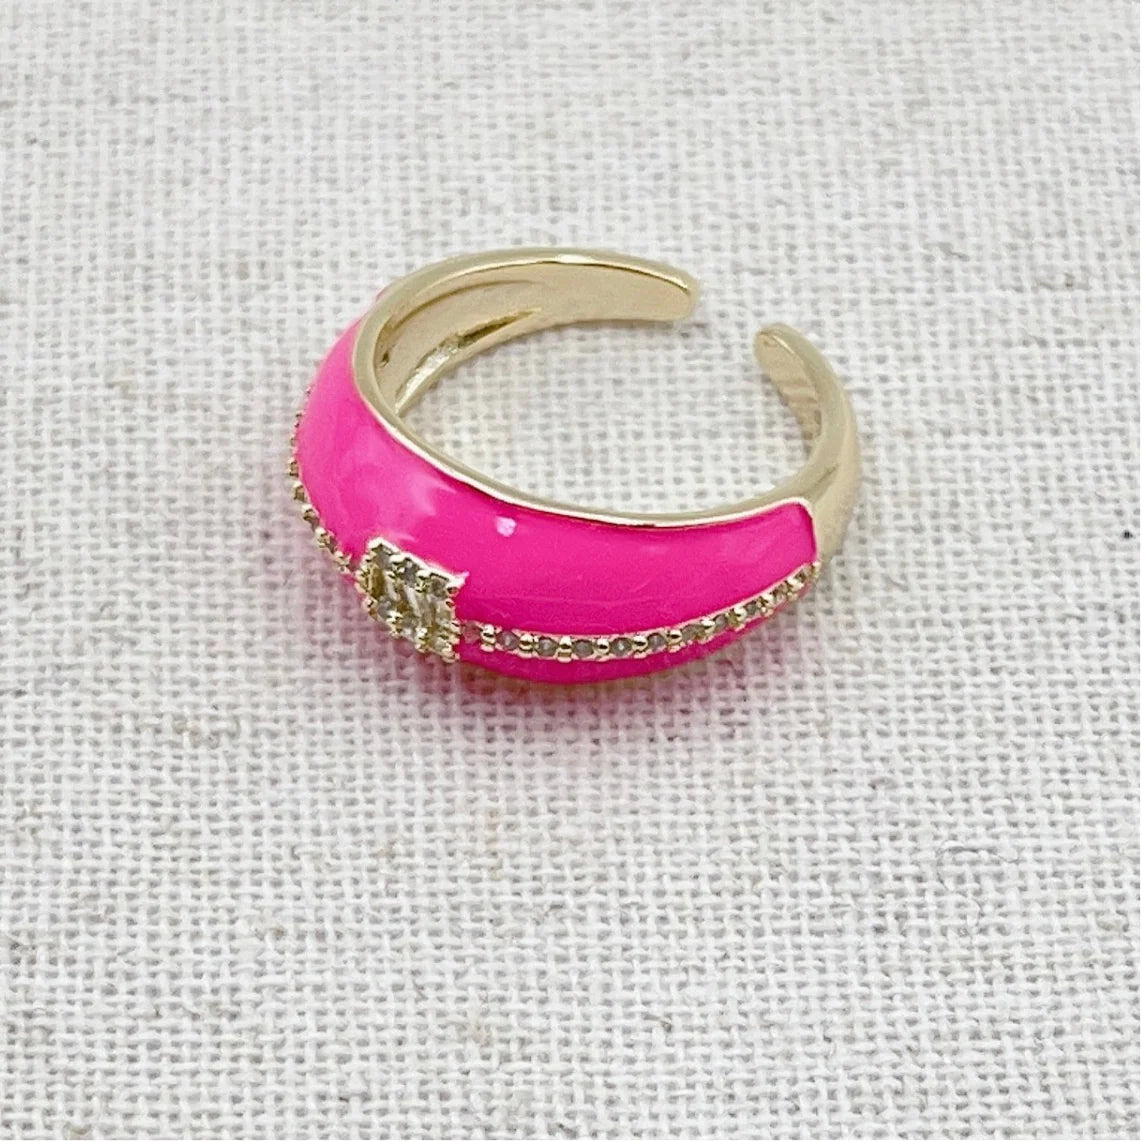 Pink with gold and crystal detailing.  Adjustable.  